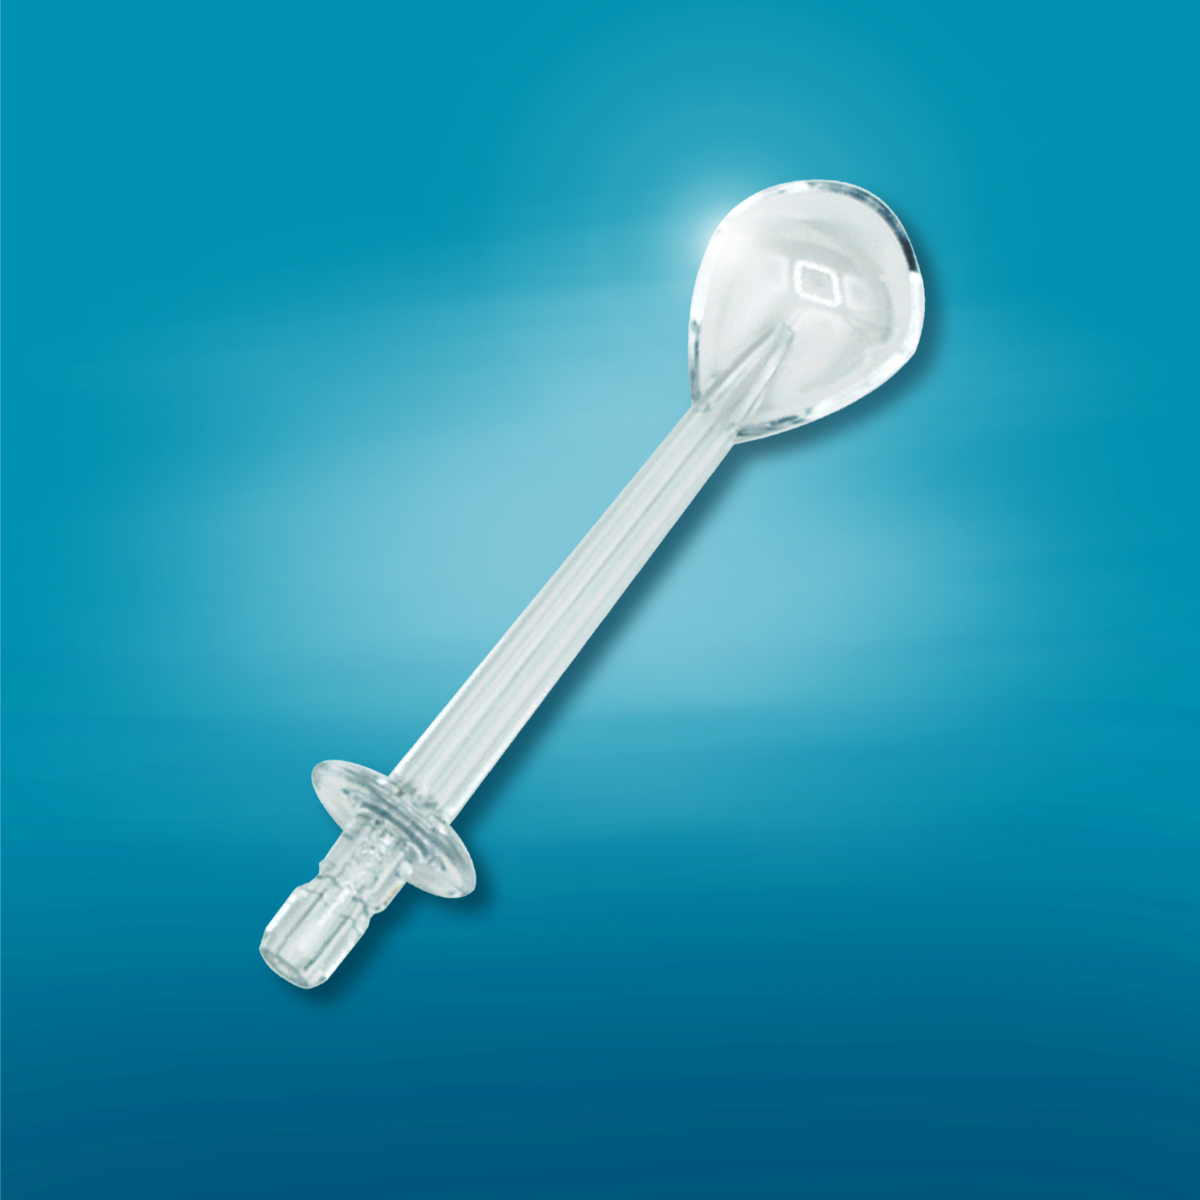 A clear plastic disposable spoon against a blue background.